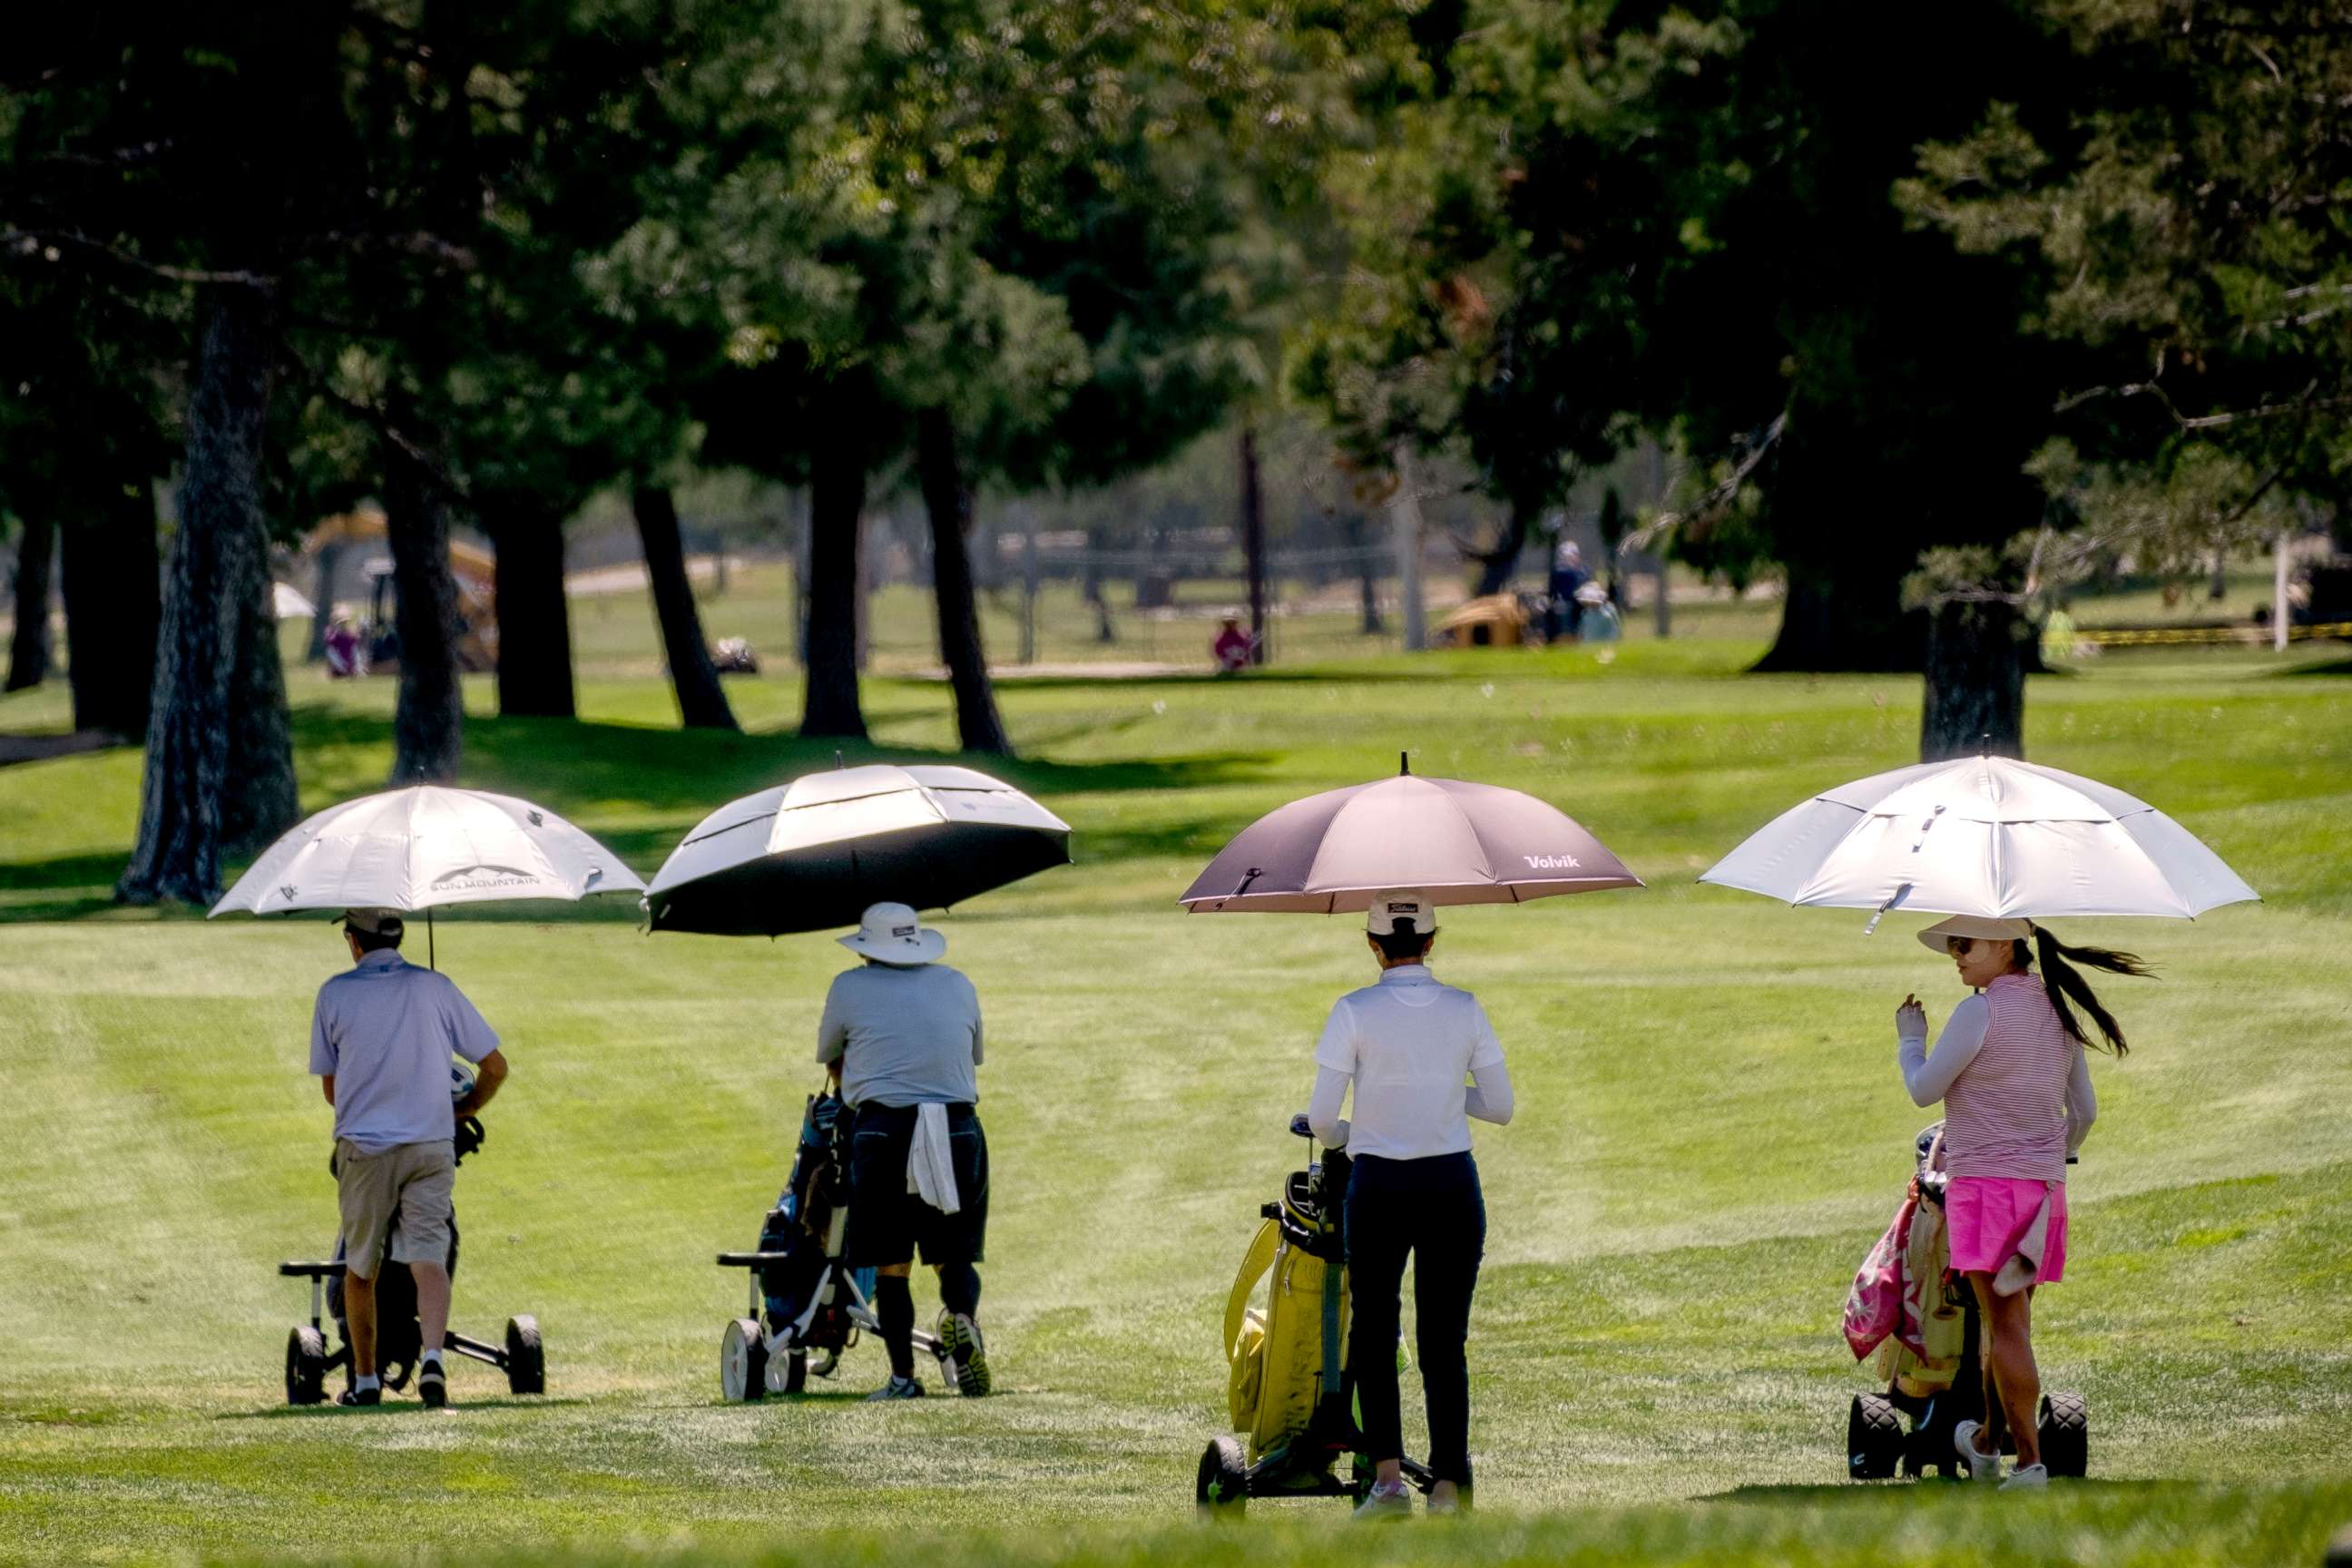 PHOTO: Golfers use umbrellas to shield them from the sun while on the links at Brookside Golf Course in Pasadena, CA, April 25, 2022.